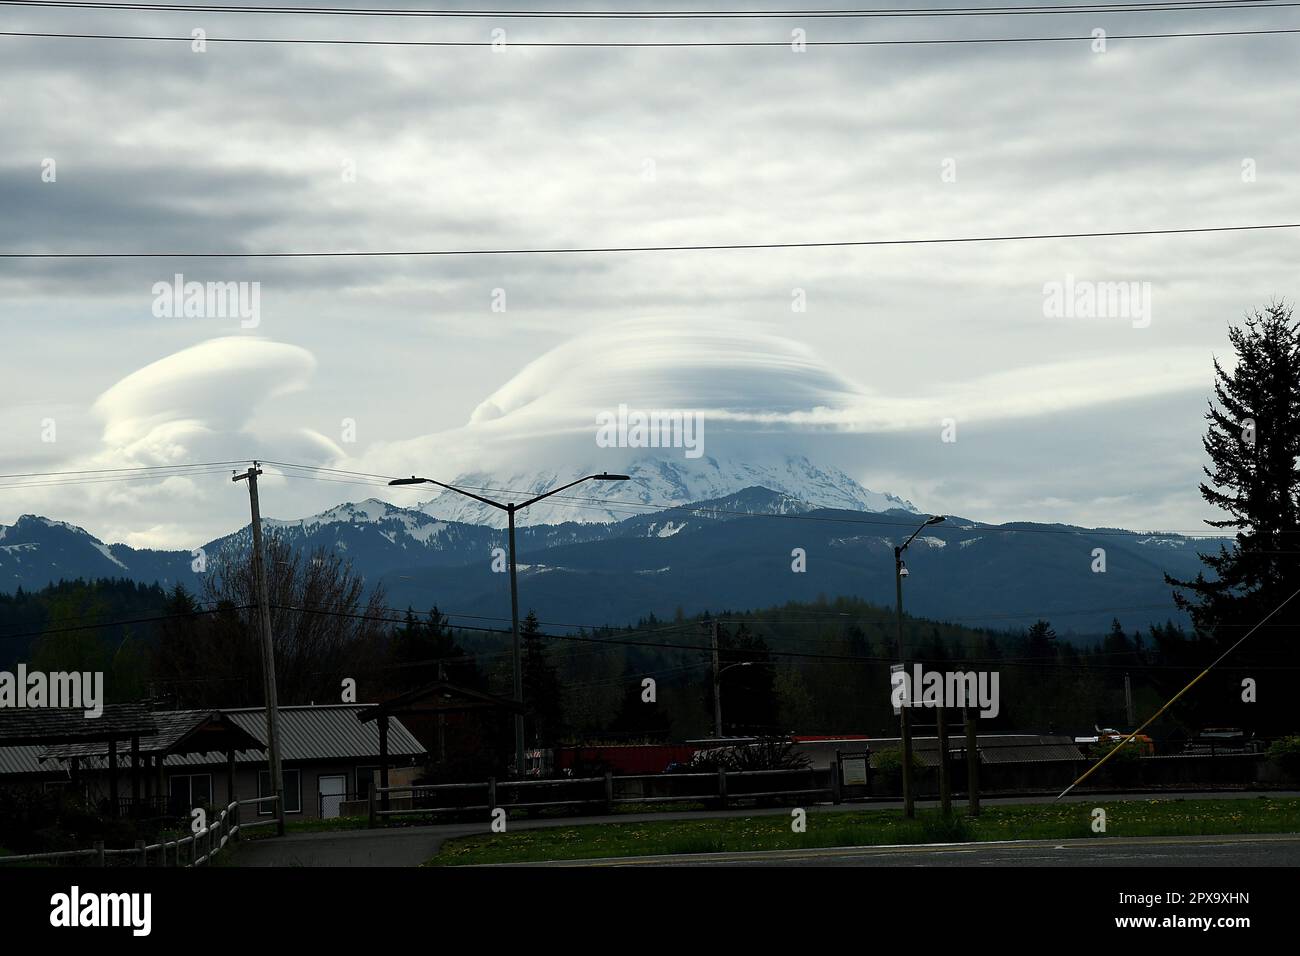 BbUCKELY/WASHINGTON/USA  21.April 2019/ .View of great mount rainer in washington state, view from Buckley washington, usa .(Photo..Francis Dean / Dean Pictures) Stock Photo